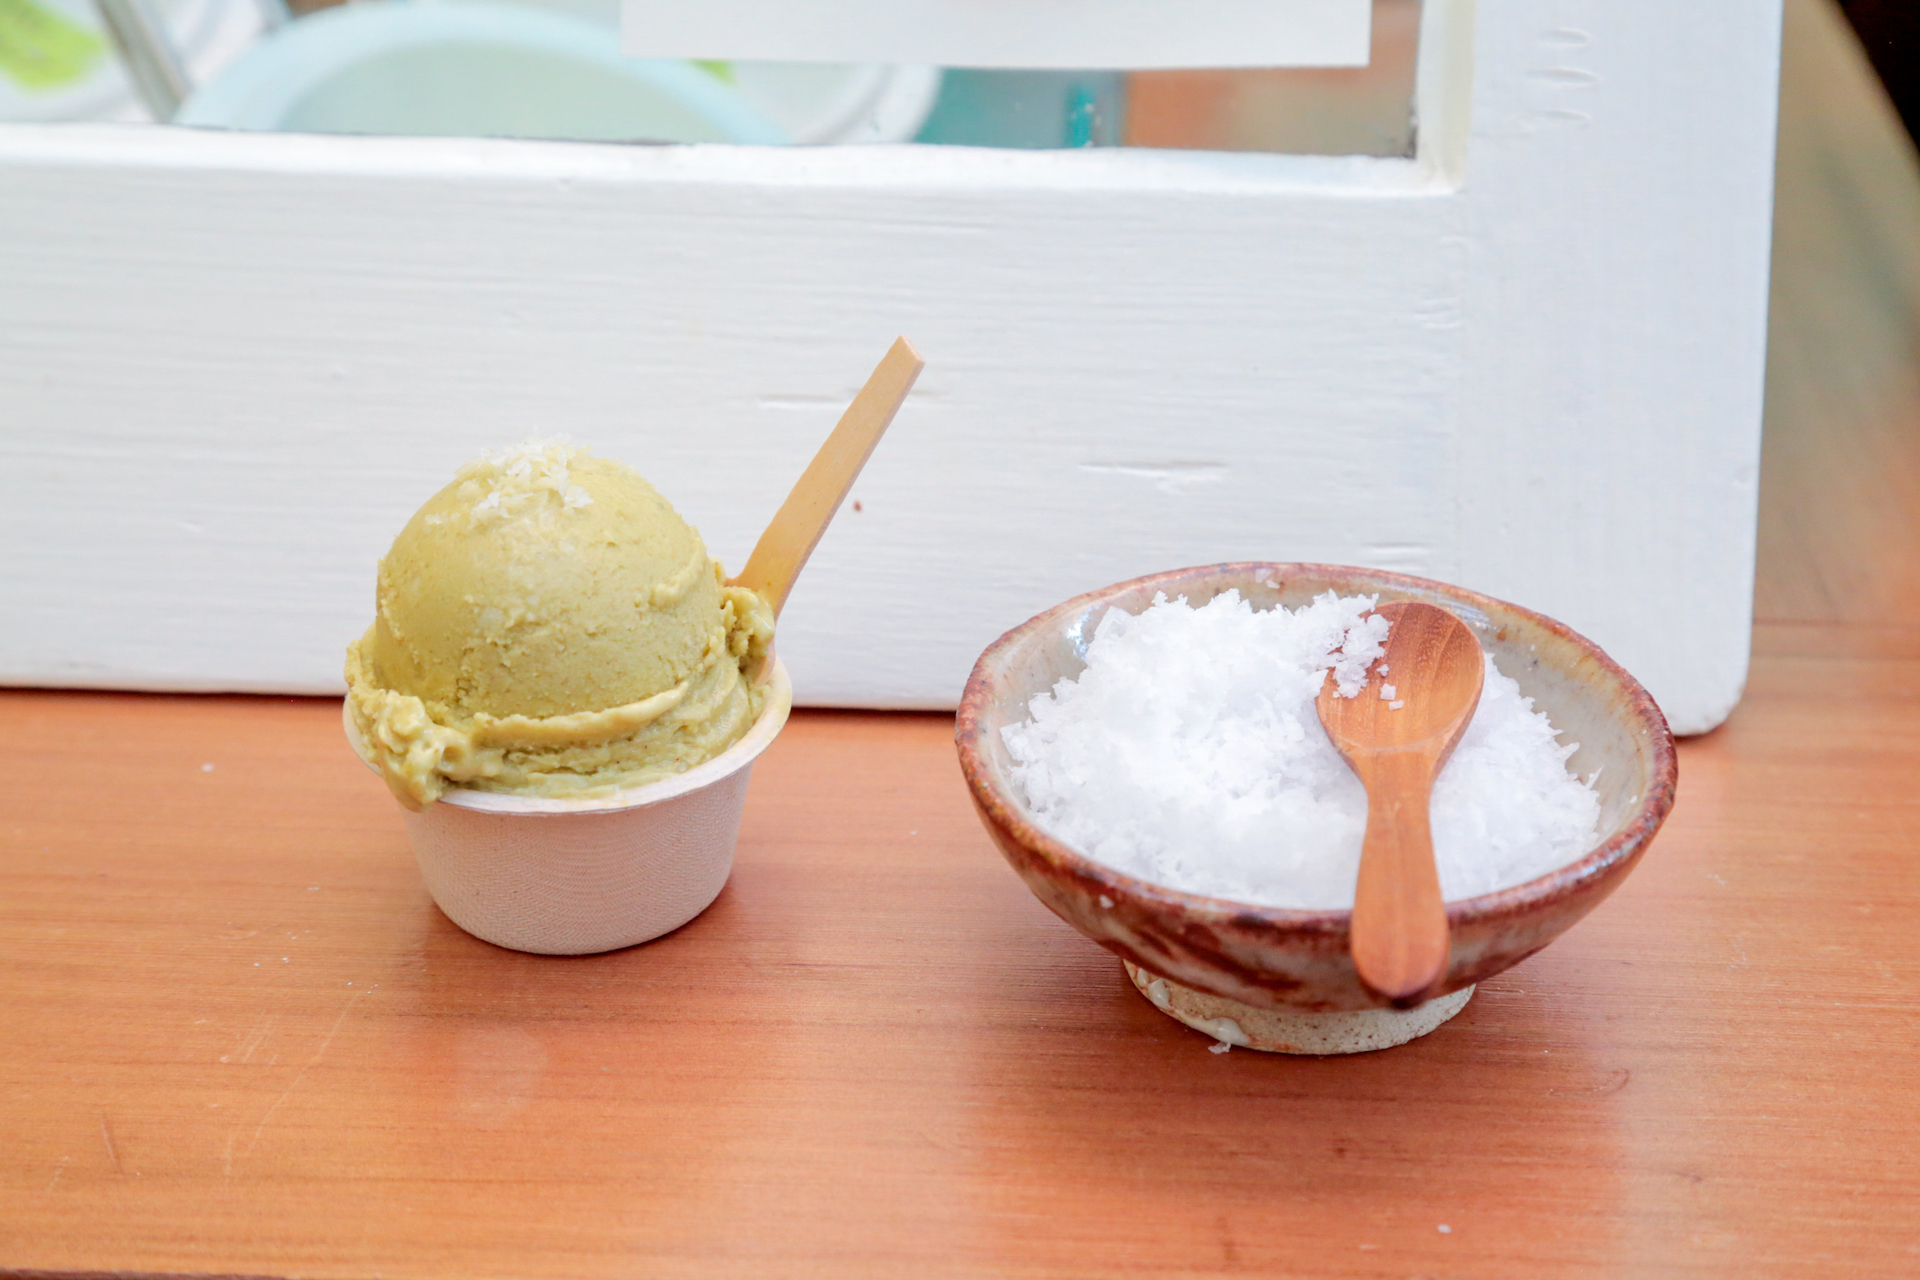 A scoop of pistachio sorbet is served with some Maldon salt.